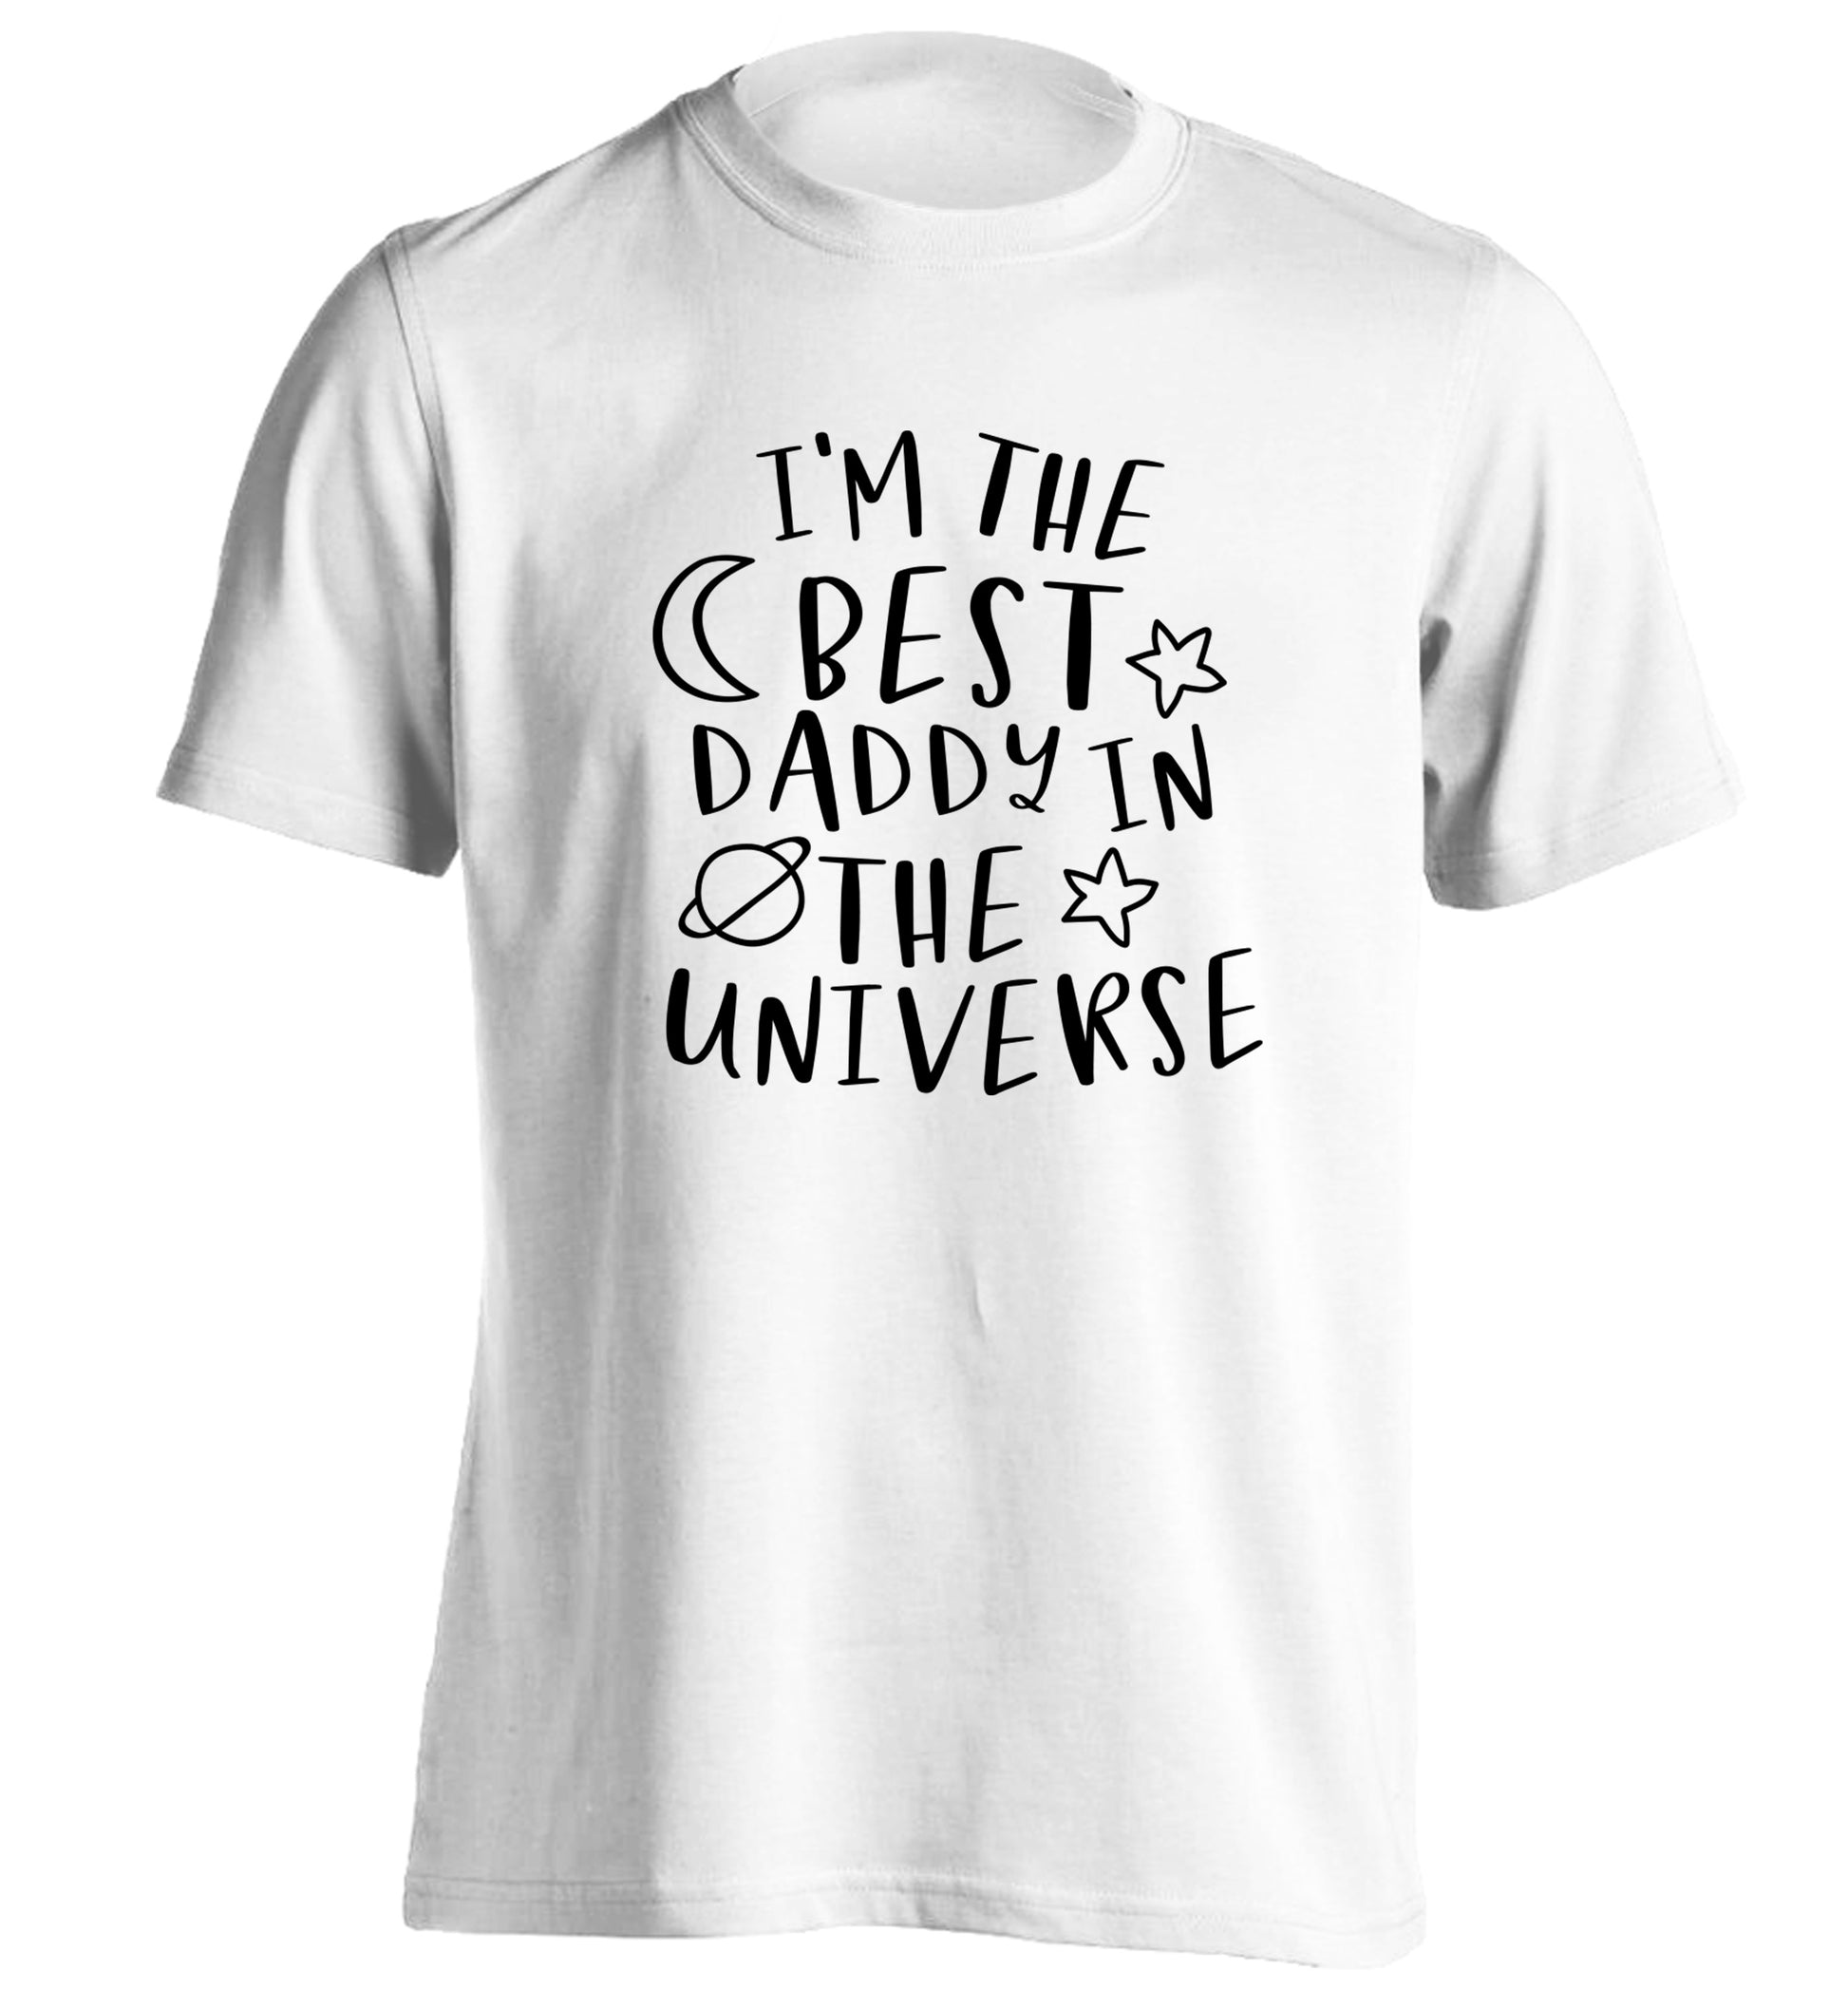 I'm the best daddy in the universe adults unisex white Tshirt 2XL